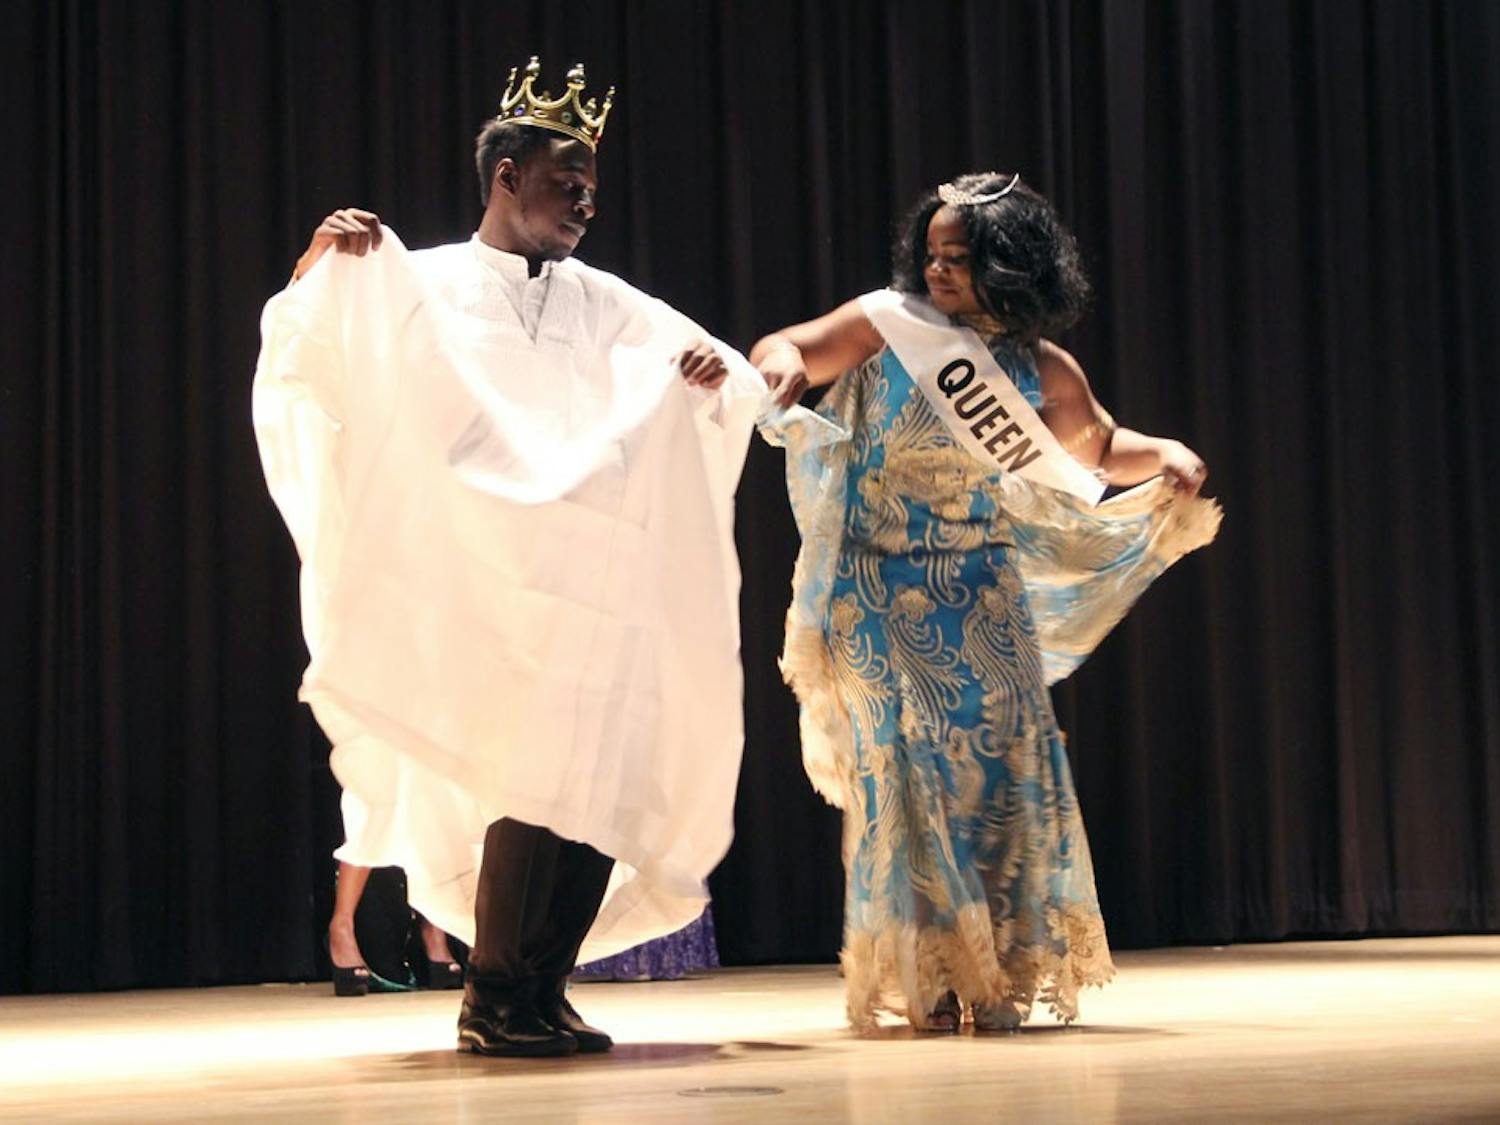 Adeyinka Ajiboye (left) and&nbsp;Abiola Oladitan (right) were named king and queen of ASA's Jambo&nbsp;Pageant&nbsp;in the&nbsp;Student Union Theater Sunday night.&nbsp;